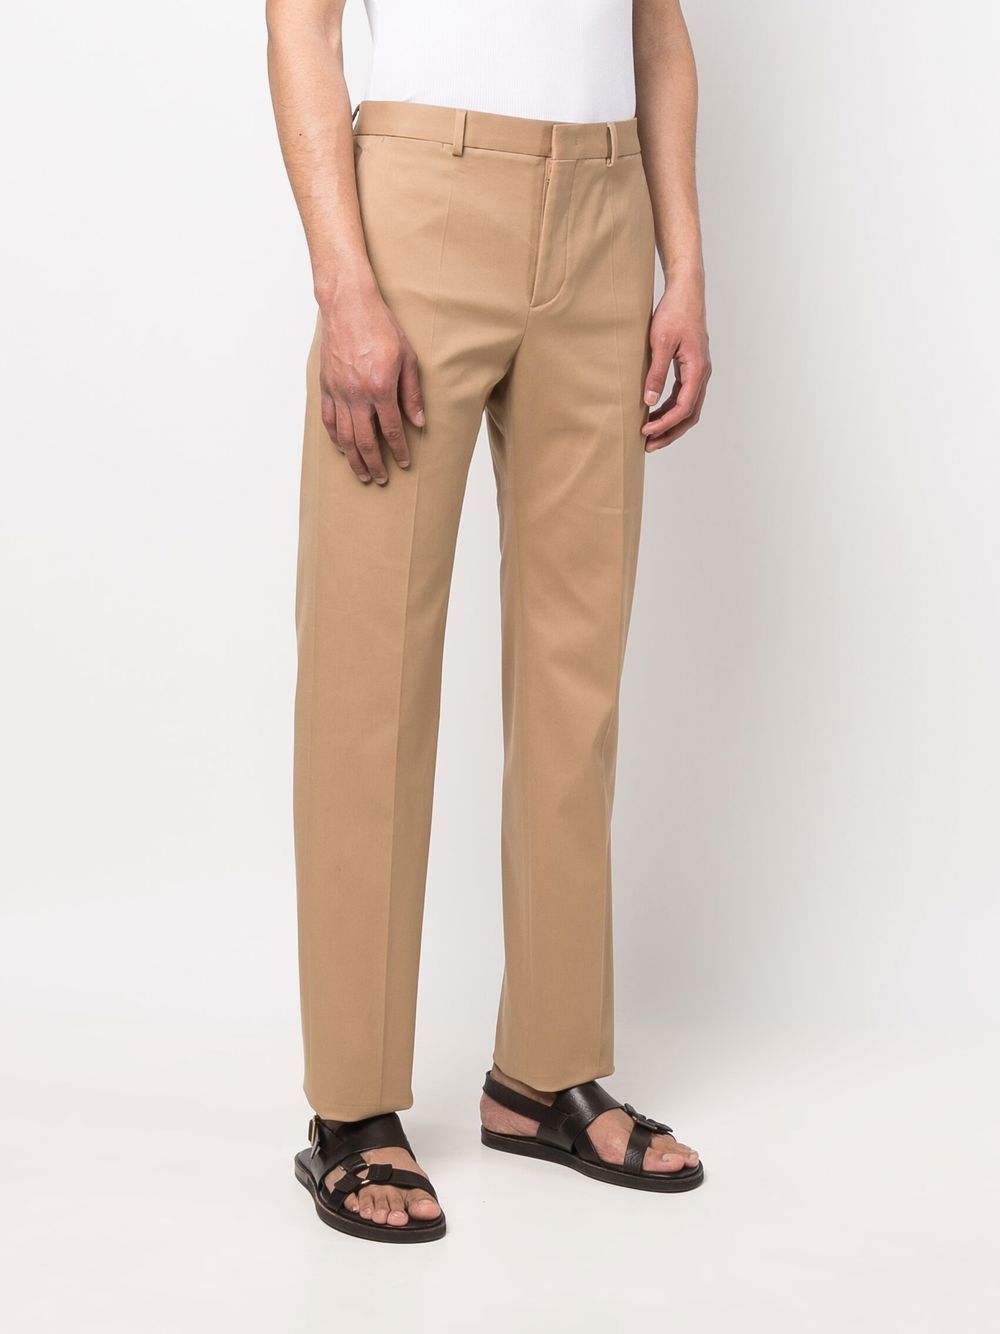 VALENTINO Men's Beige Trousers for FW22